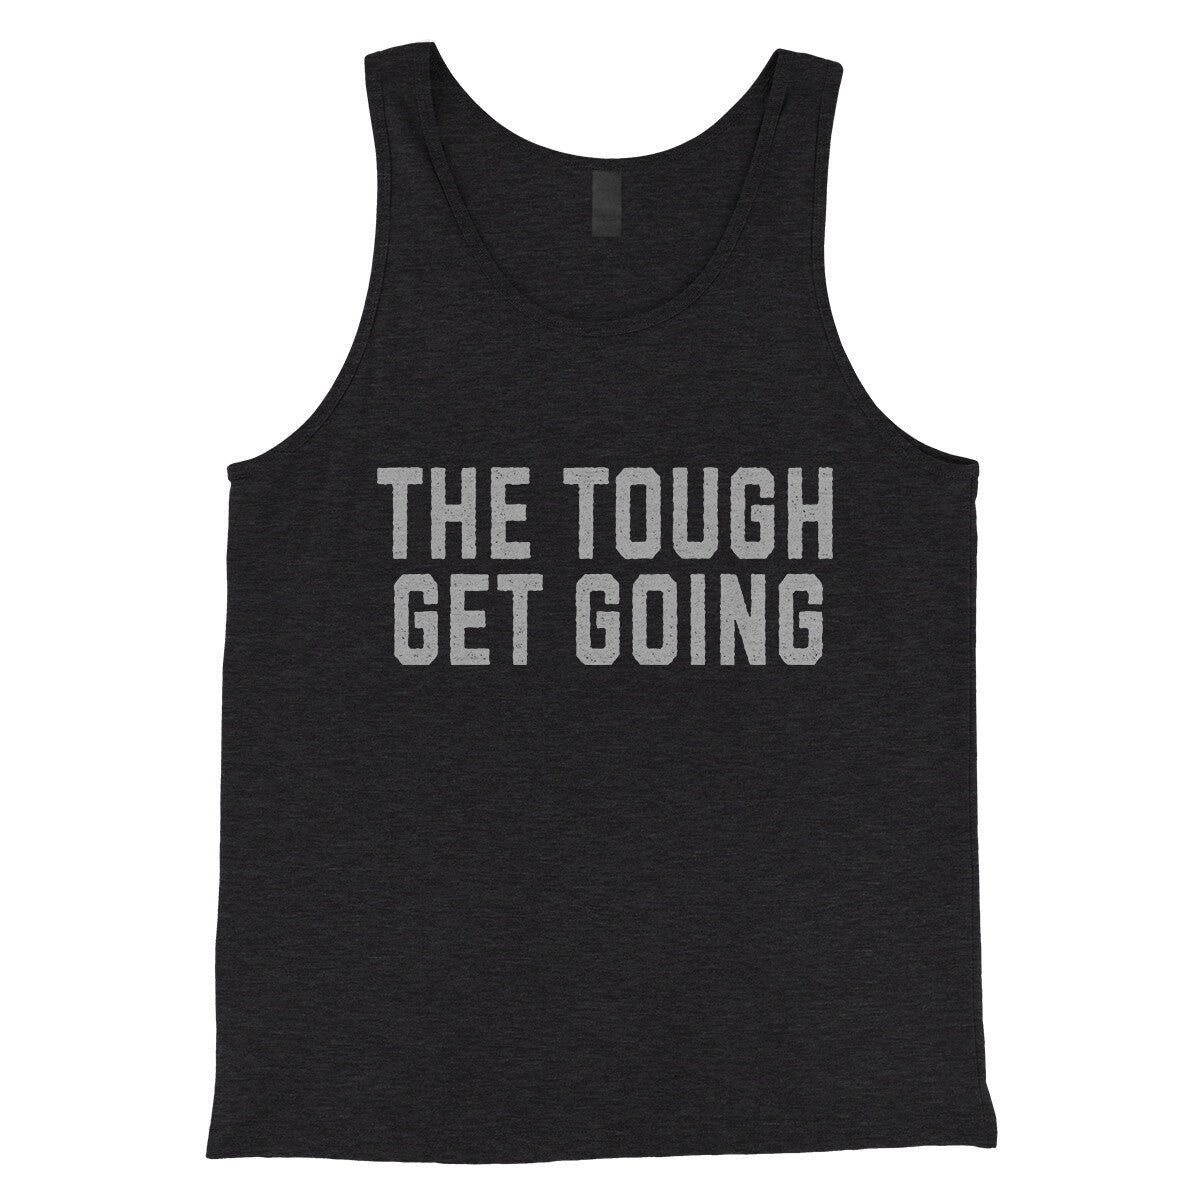 The Tough Get Going in Charcoal Black TriBlend Color